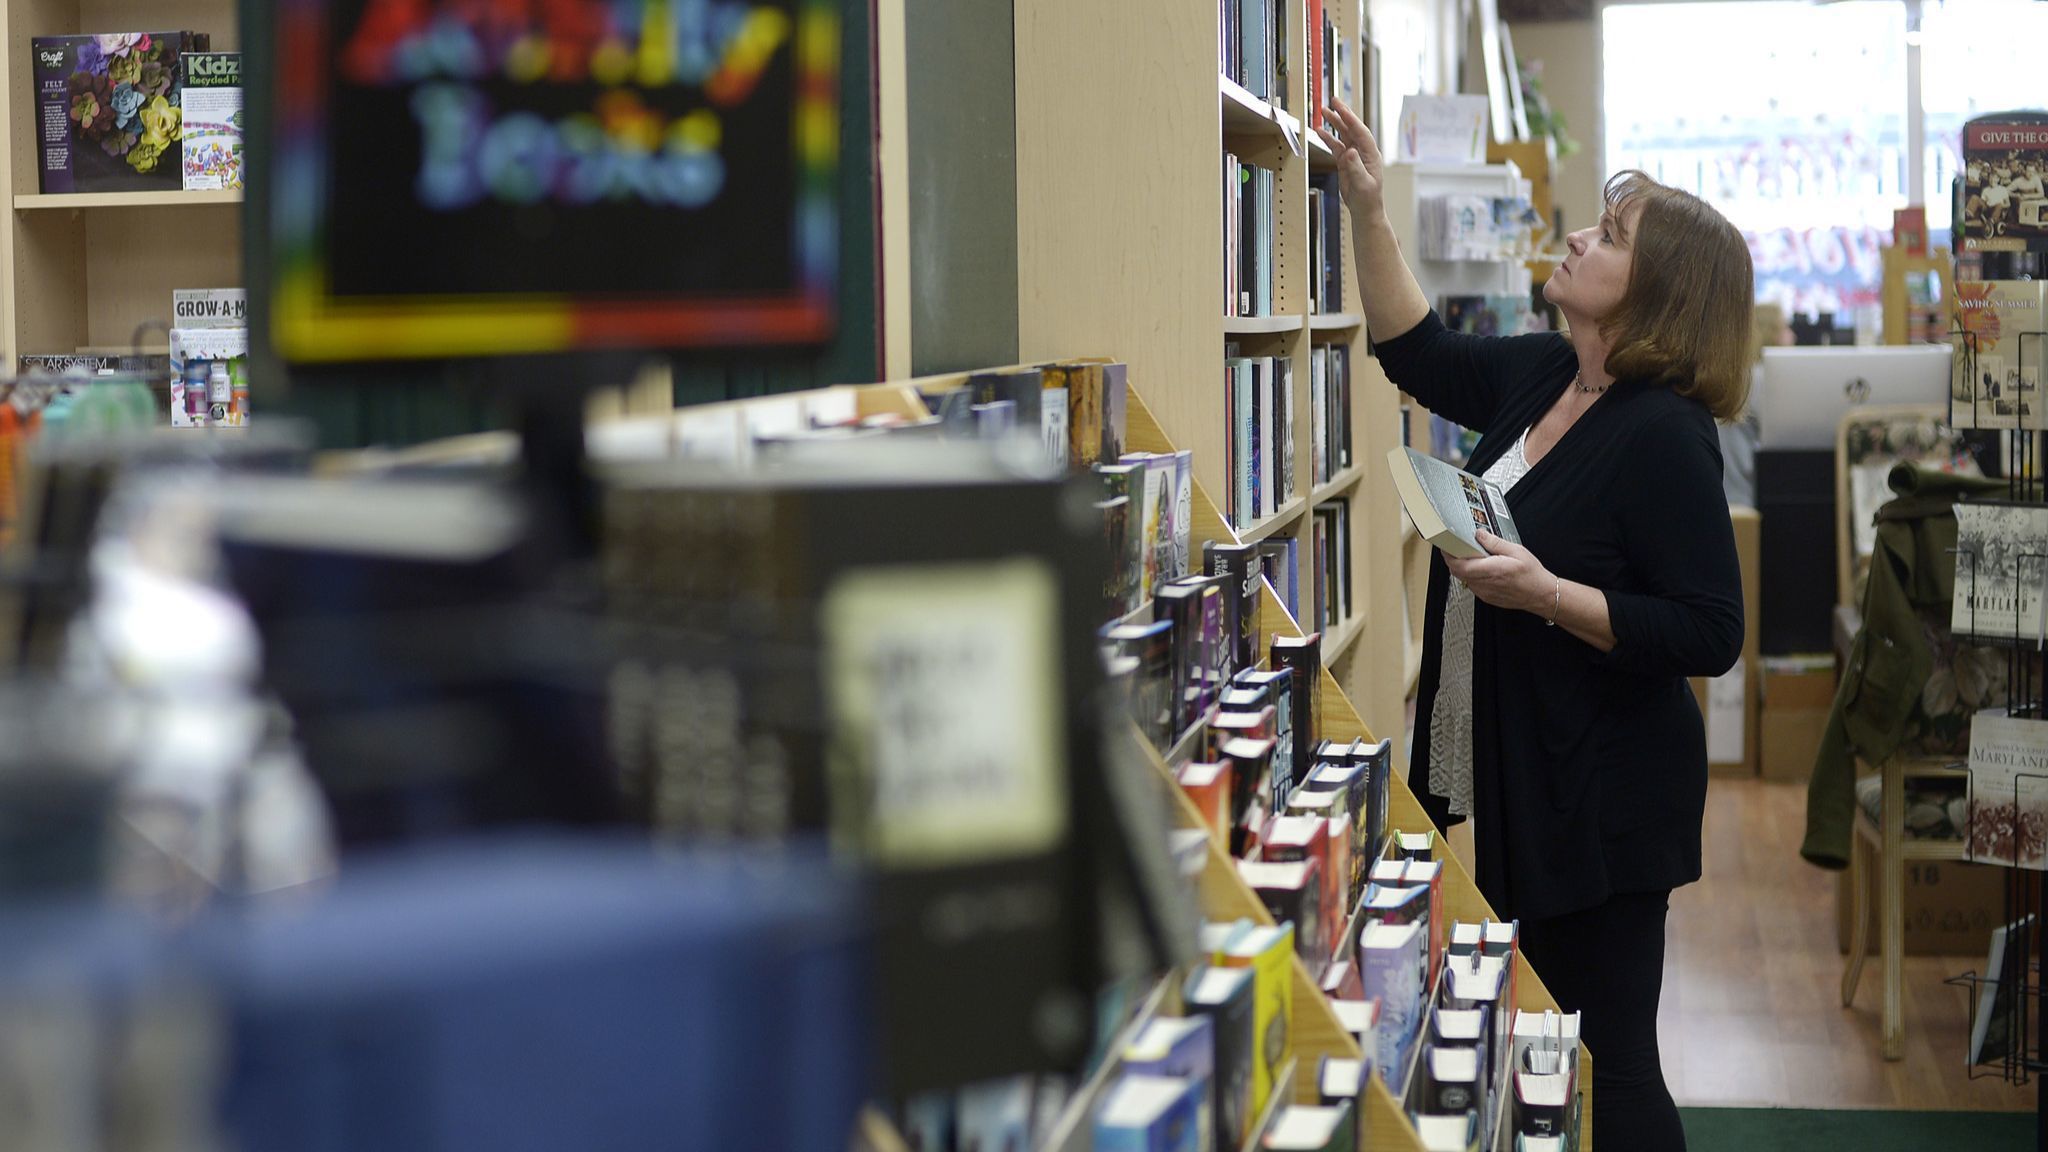 Owner Debbie Scheller at a Likely Story Bookstore in Sykesville Monday, Feb 4, 2019. A Likely Story